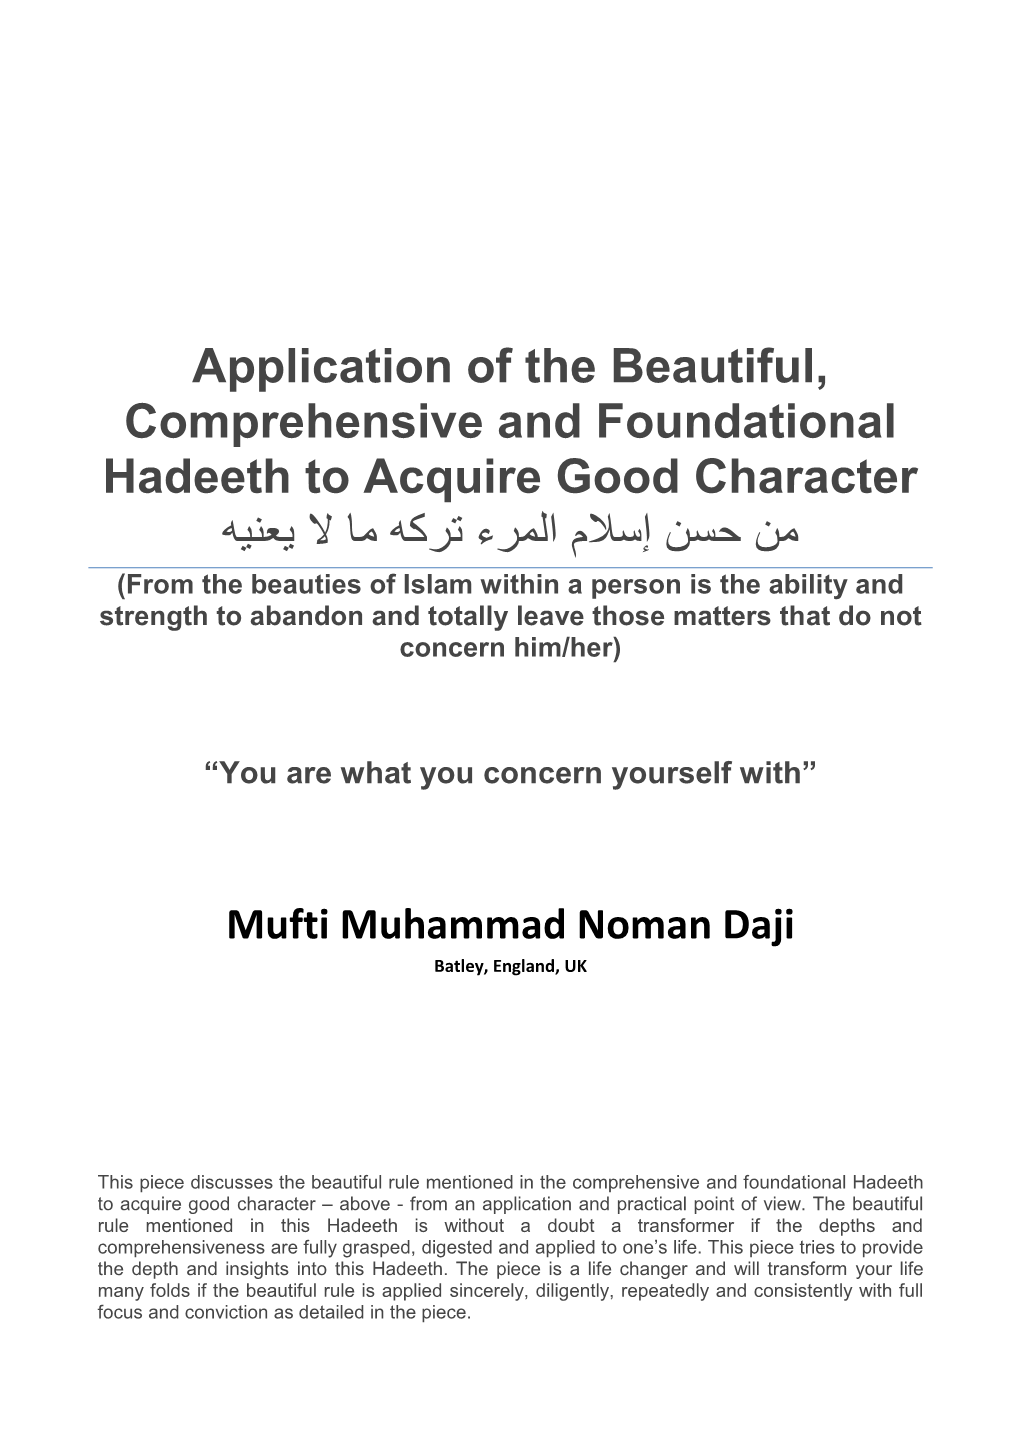 Application of the Beautiful, Comprehensive and Foundational